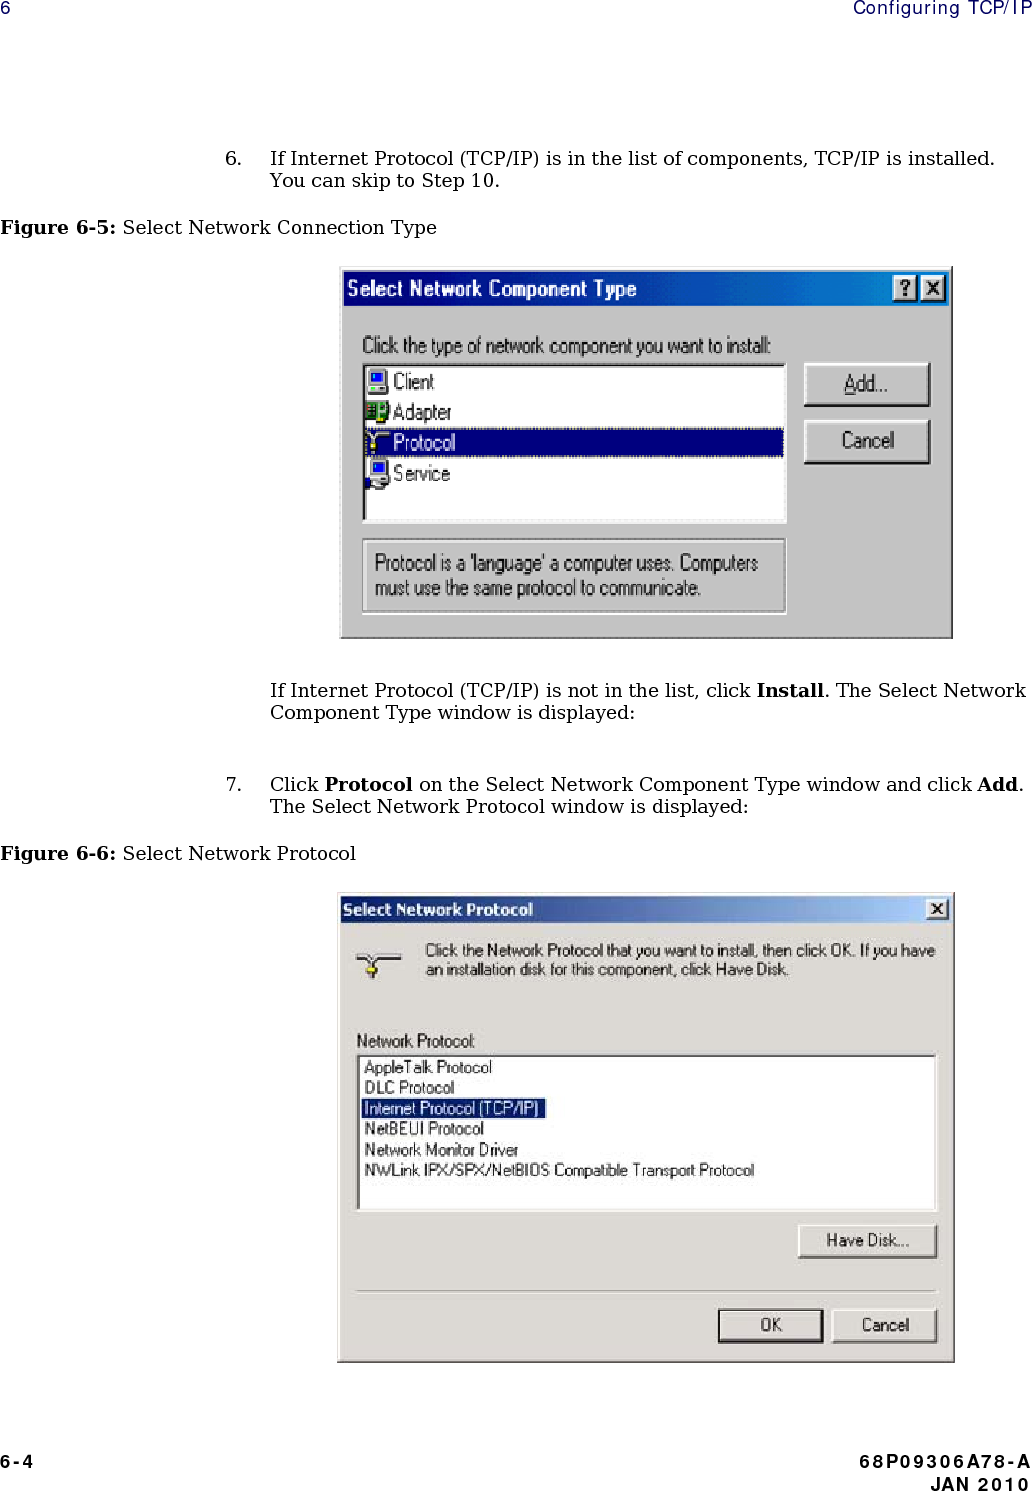 6  Configuring TCP/IP  6. If Internet Protocol (TCP/IP) is in the list of components, TCP/IP is installed. You can skip to Step 10. Figure 6-5: Select Network Connection Type                                  If Internet Protocol (TCP/IP) is not in the list, click Install. The Select Network Component Type window is displayed:  7. Click Protocol on the Select Network Component Type window and click Add. The Select Network Protocol window is displayed: Figure 6-6: Select Network Protocol                                 6-4  68P09306A78-A    JAN 2010 